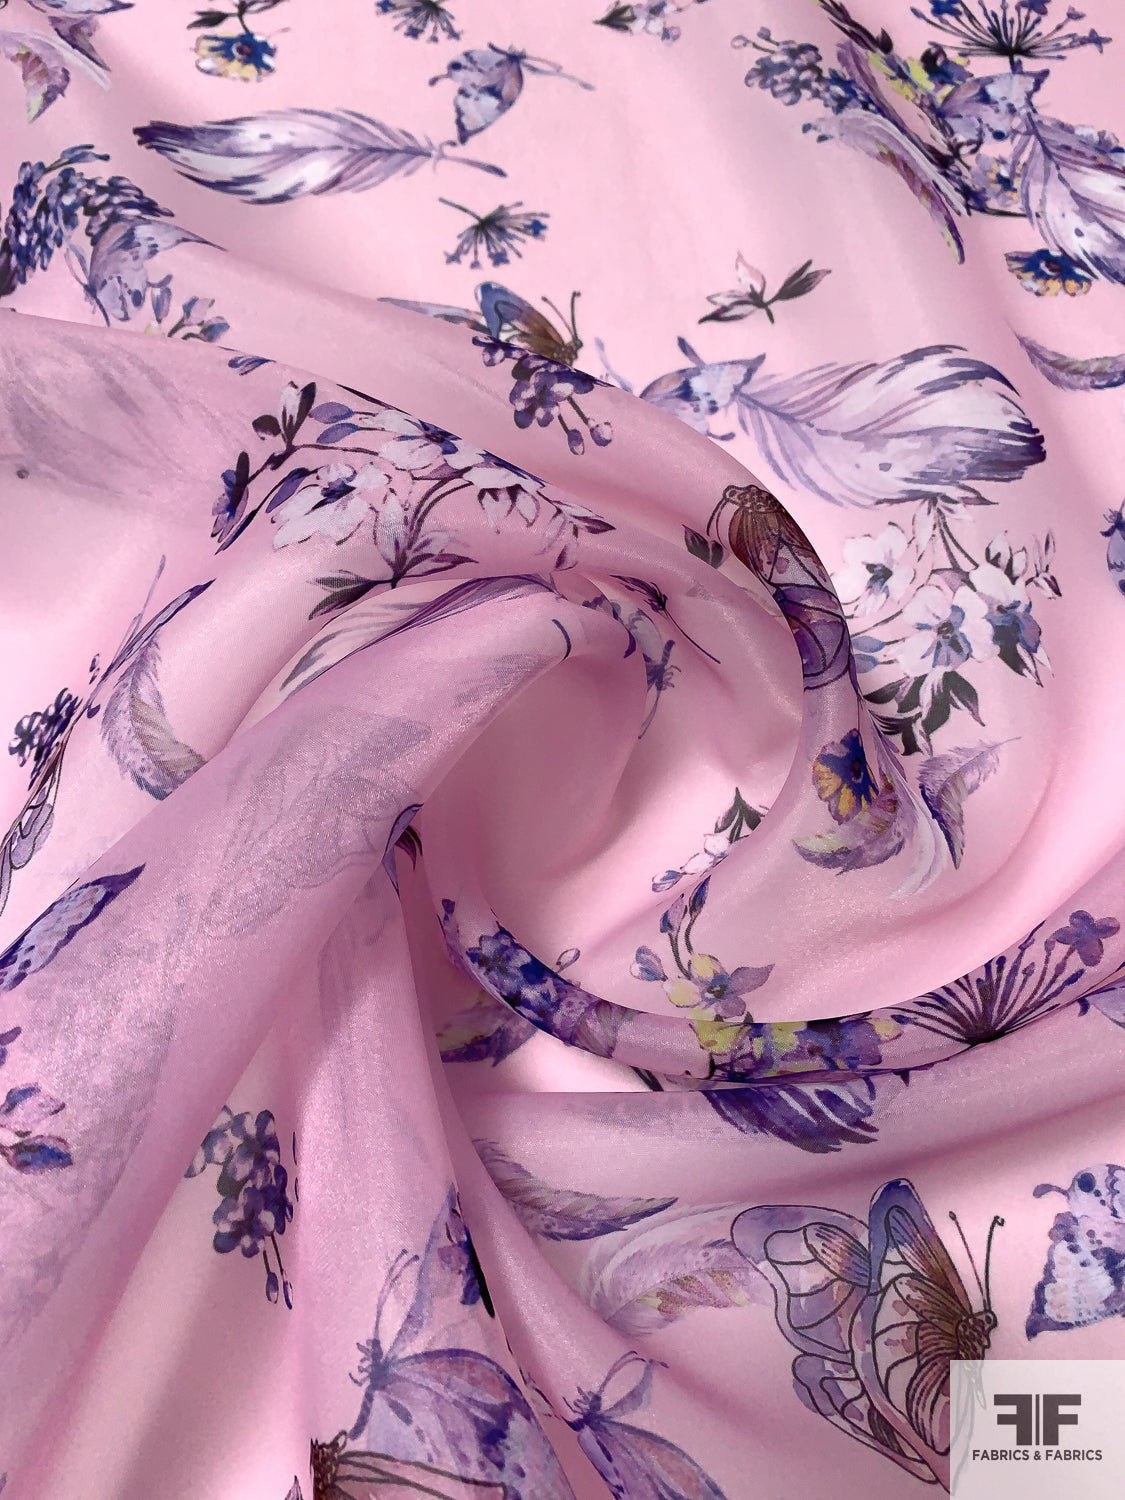 Floral and Butterfly Printed Polyester Satin Organza - Pink / Purples / Black / White